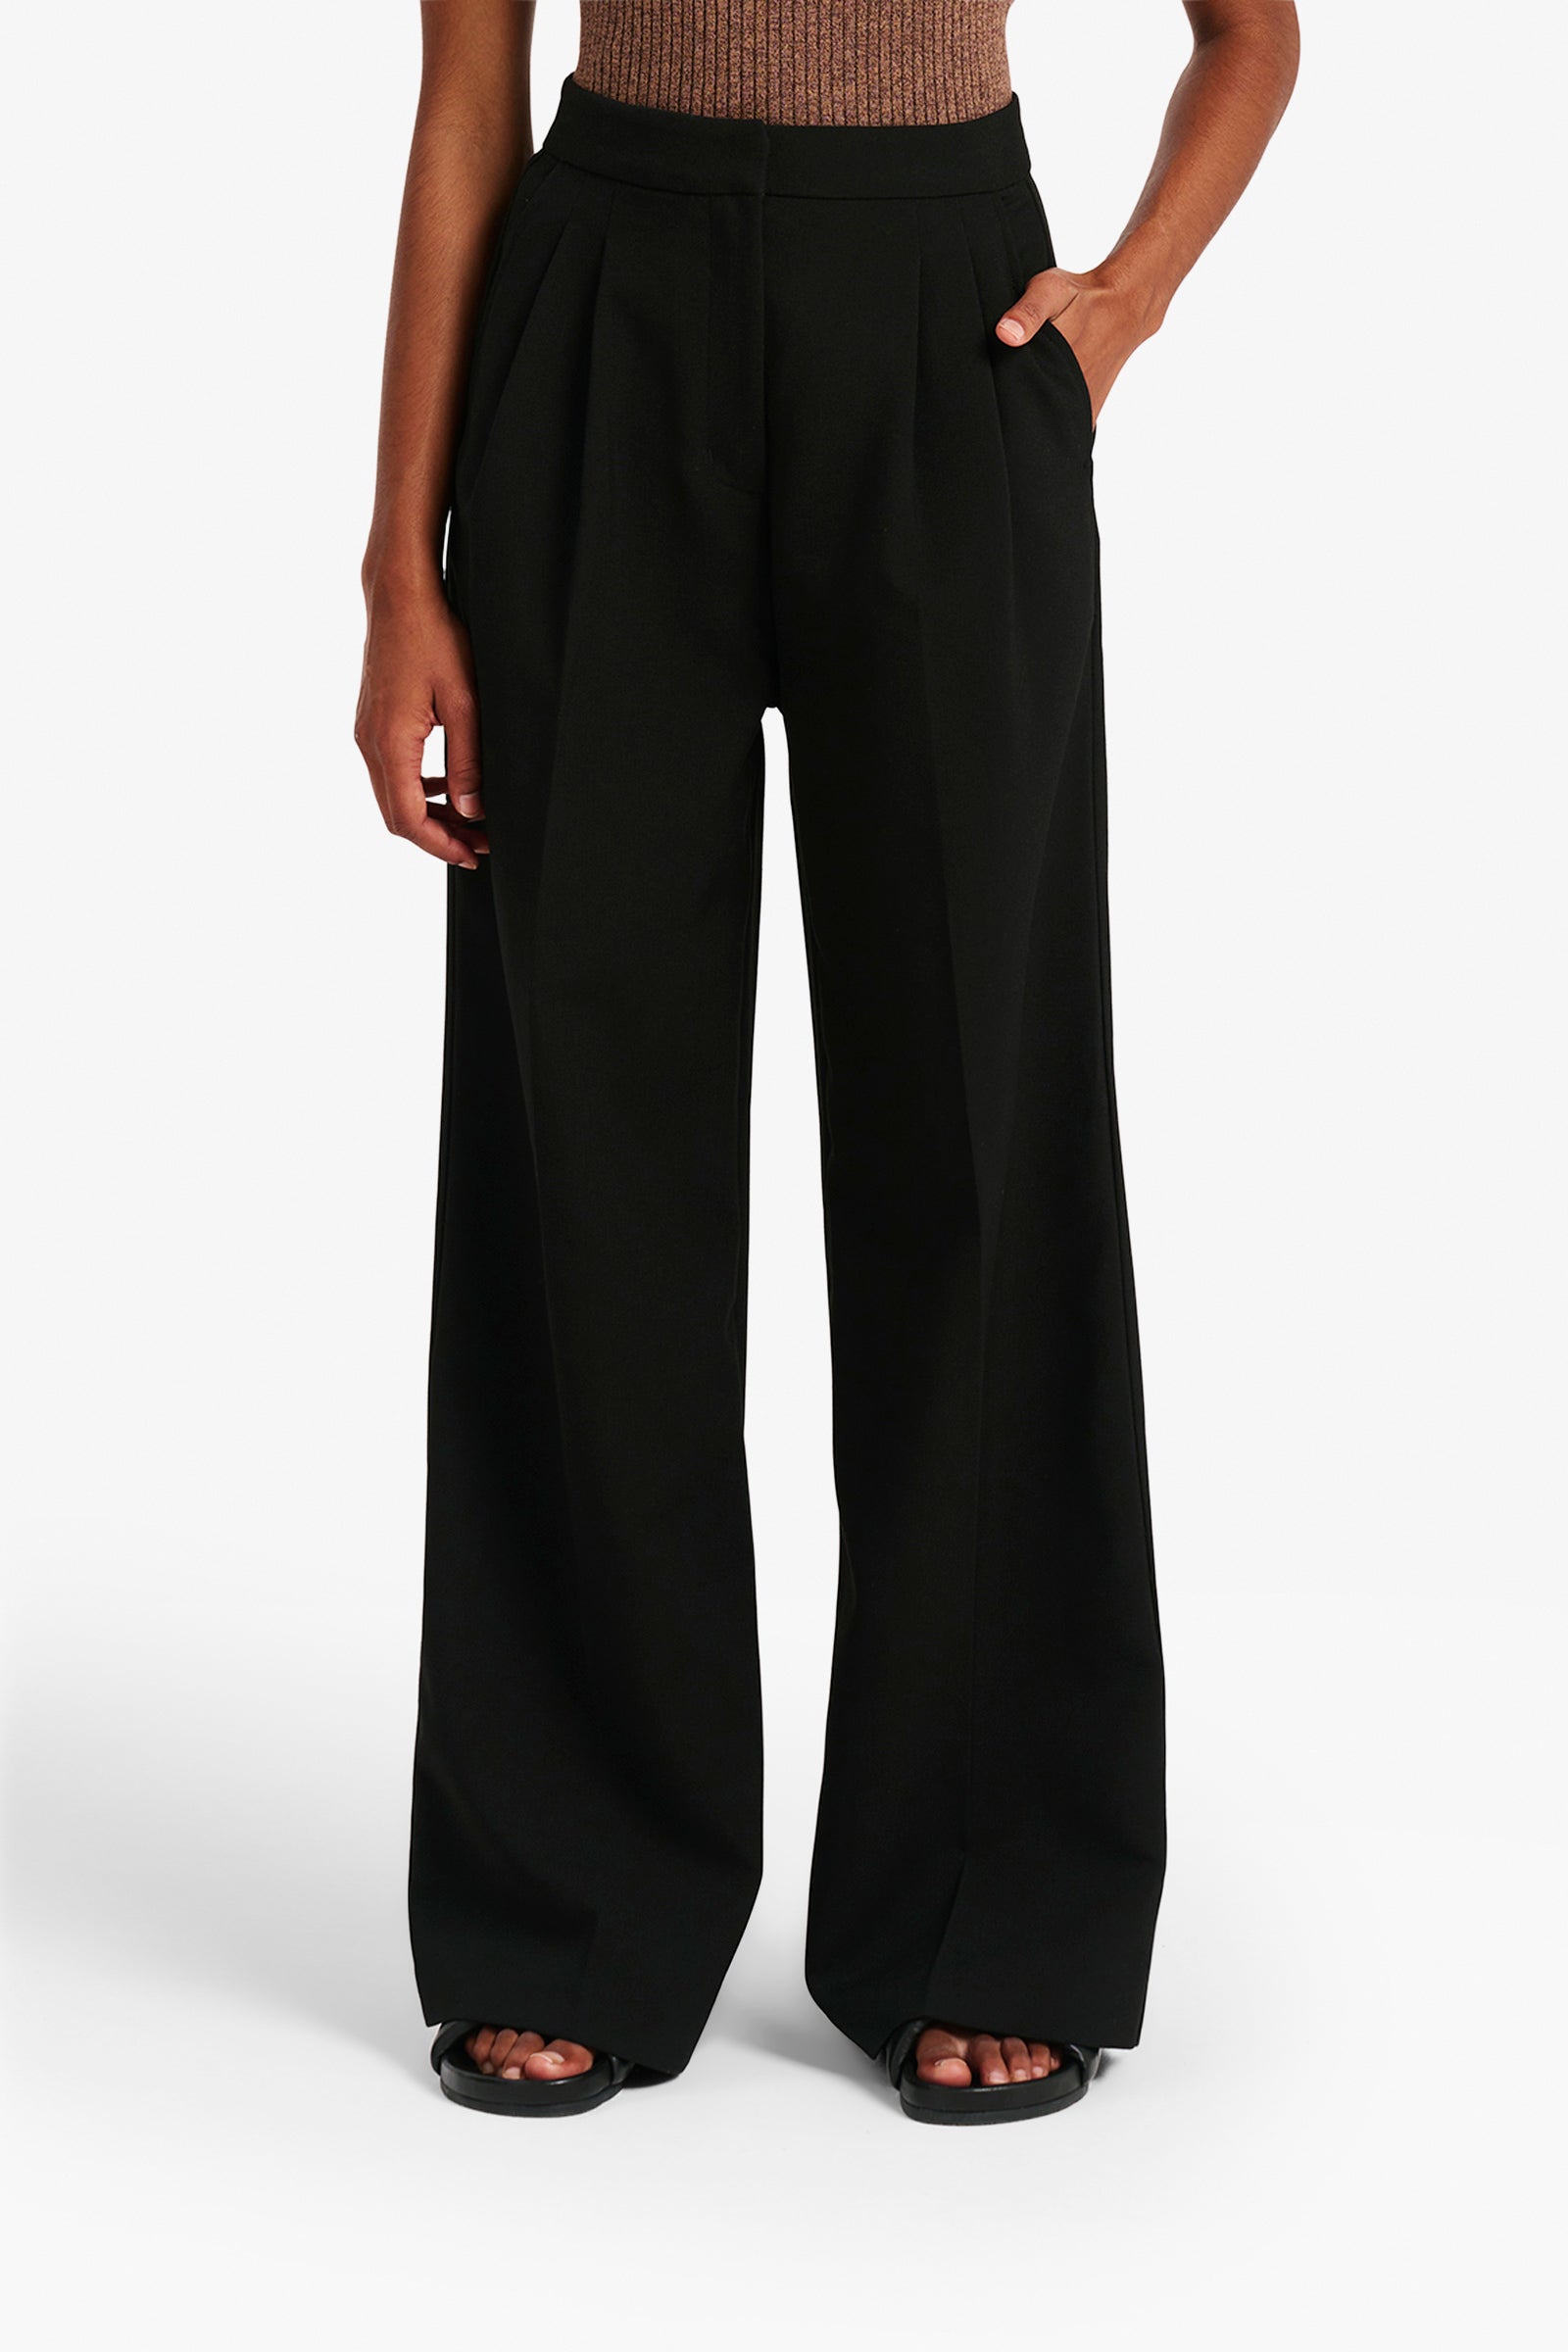 Nude Lucy Kiran Tailored Pant in Black